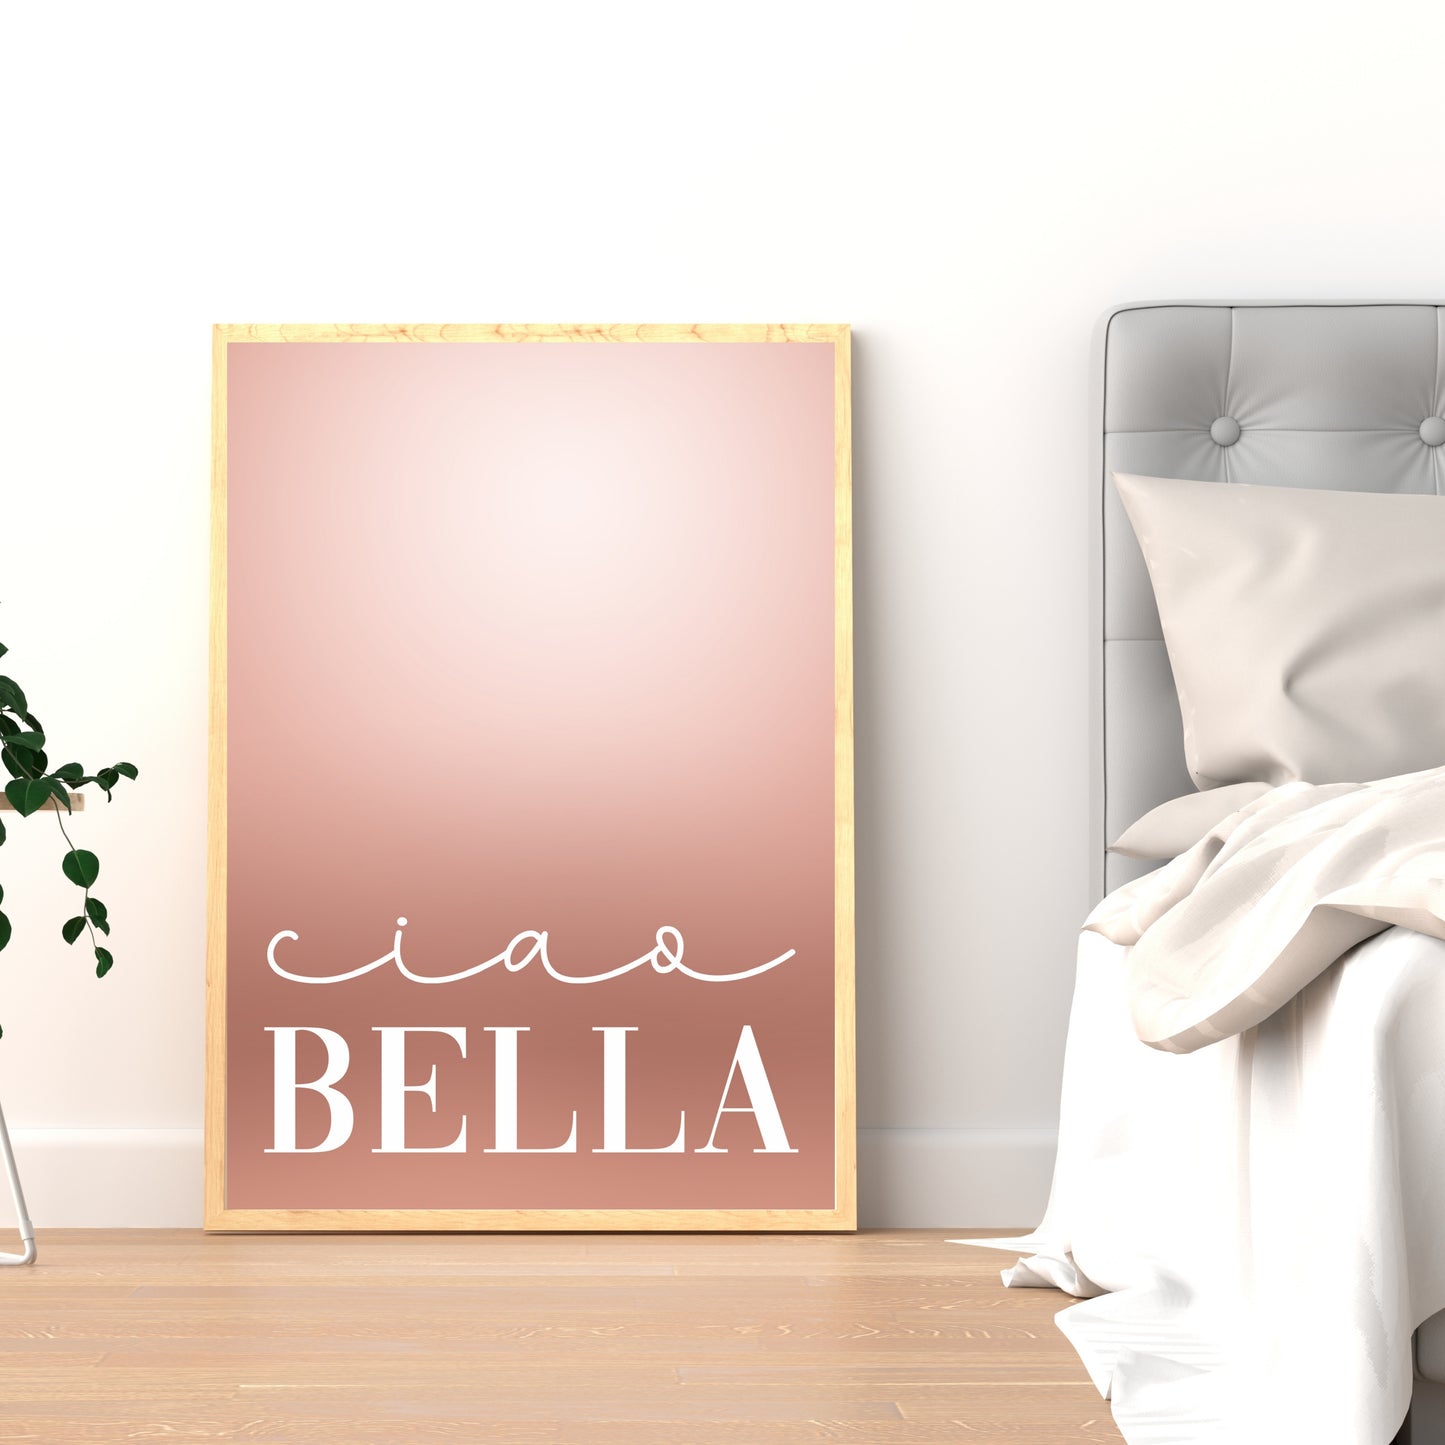 "Ciao Bella" In White With Rose Gold Background, Printable Art